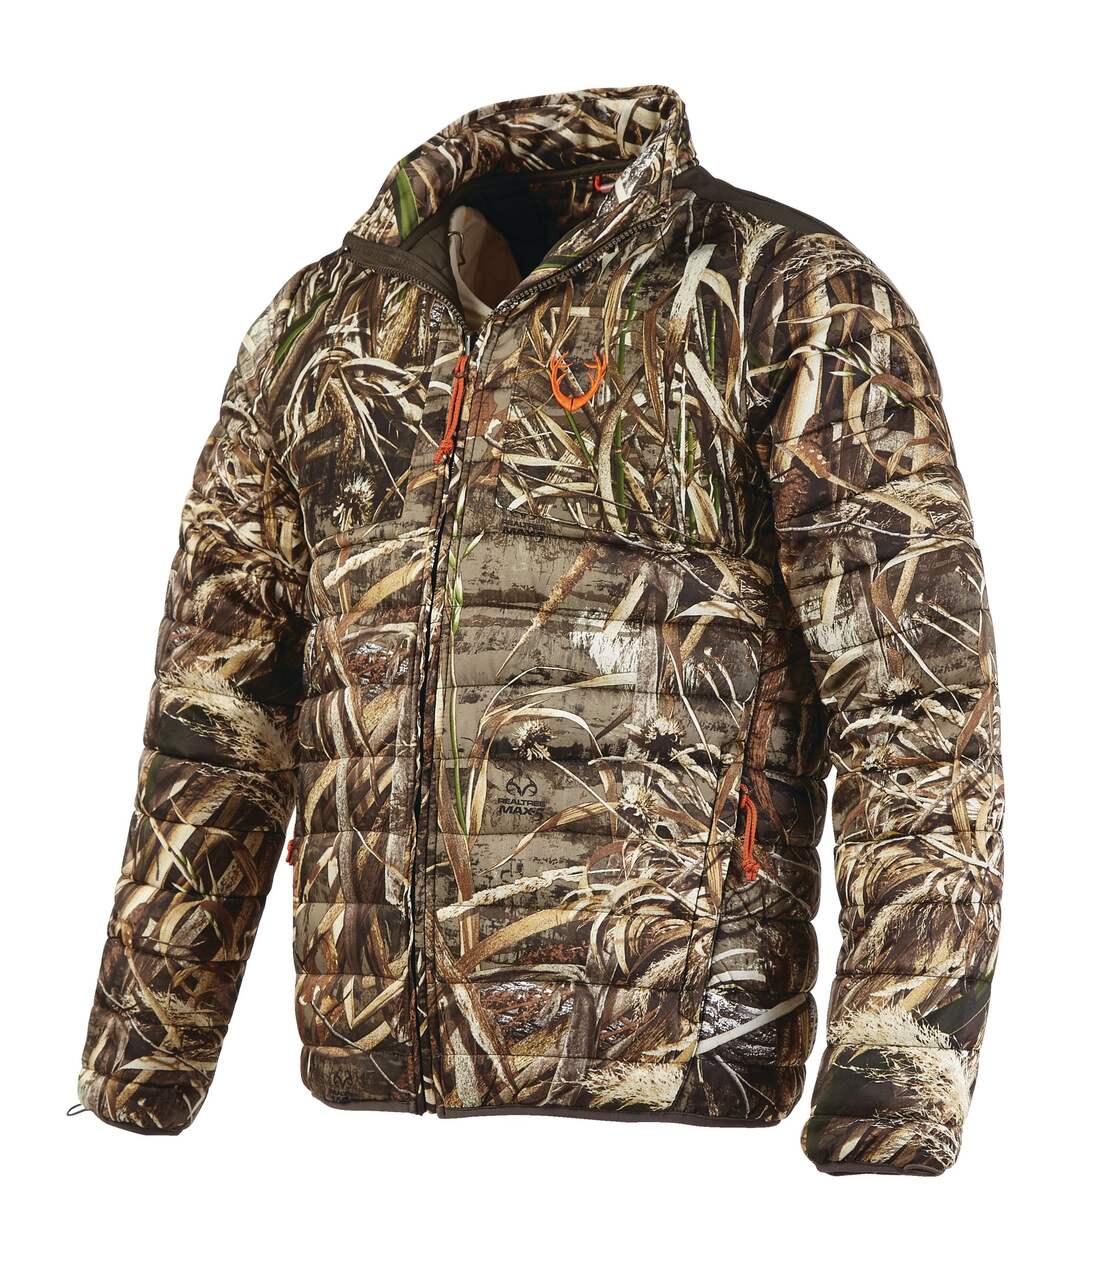 https://media-www.canadiantire.ca/product/playing/hunting/hunting-apparel-footwear/1758550/huntshield-mens-martins-3-in-1-waterfowl-jacket-m-max5-e796ad70-3922-43ca-9d83-518444831418-jpgrendition.jpg?imdensity=1&imwidth=1244&impolicy=mZoom